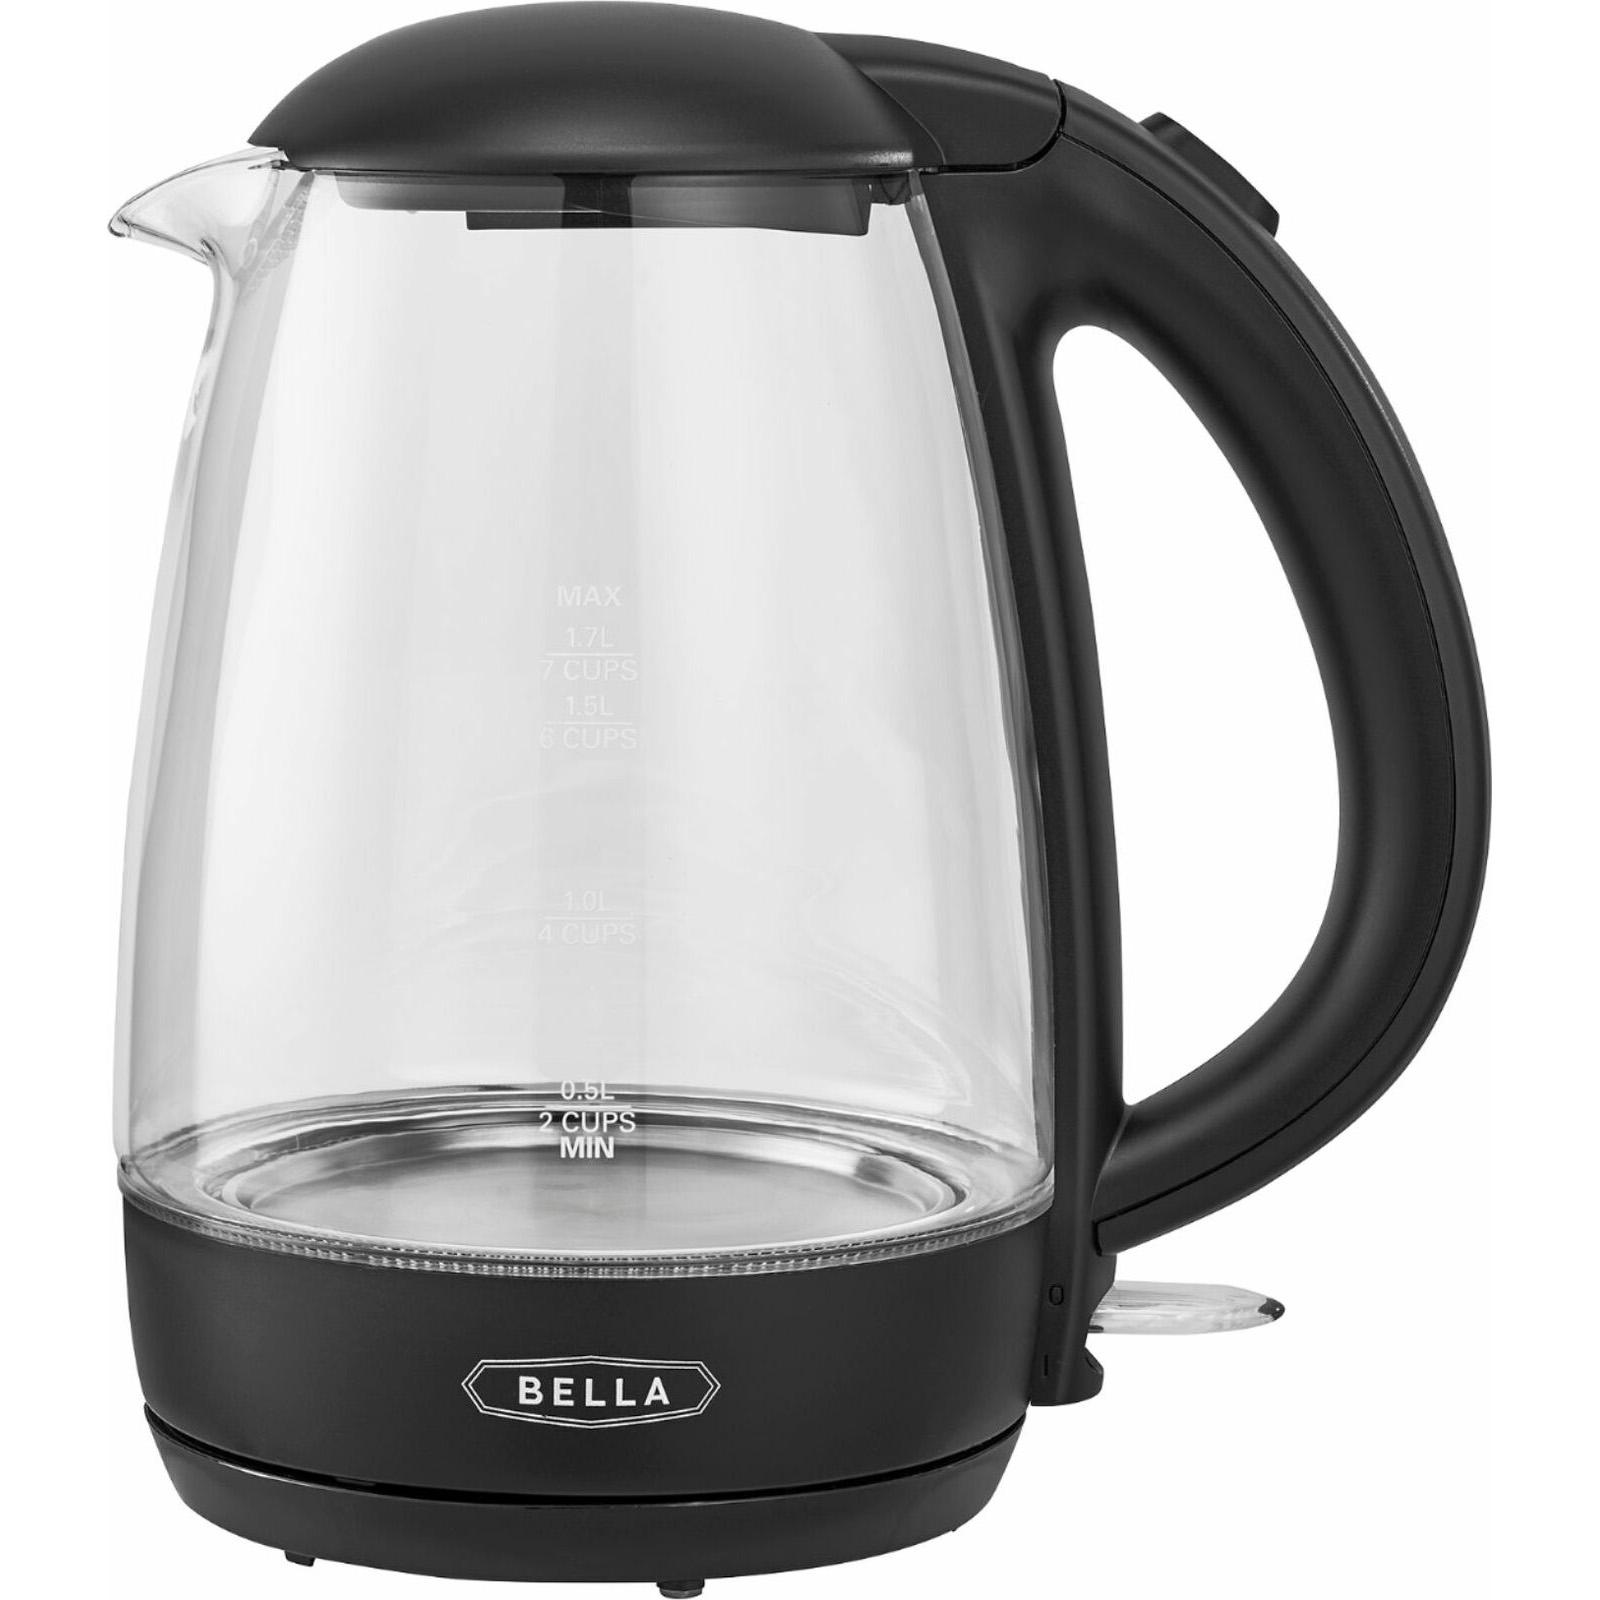 Bella 1.7L Illuminated Electric Water Heater Glass Kettle for $11.98 Shipped